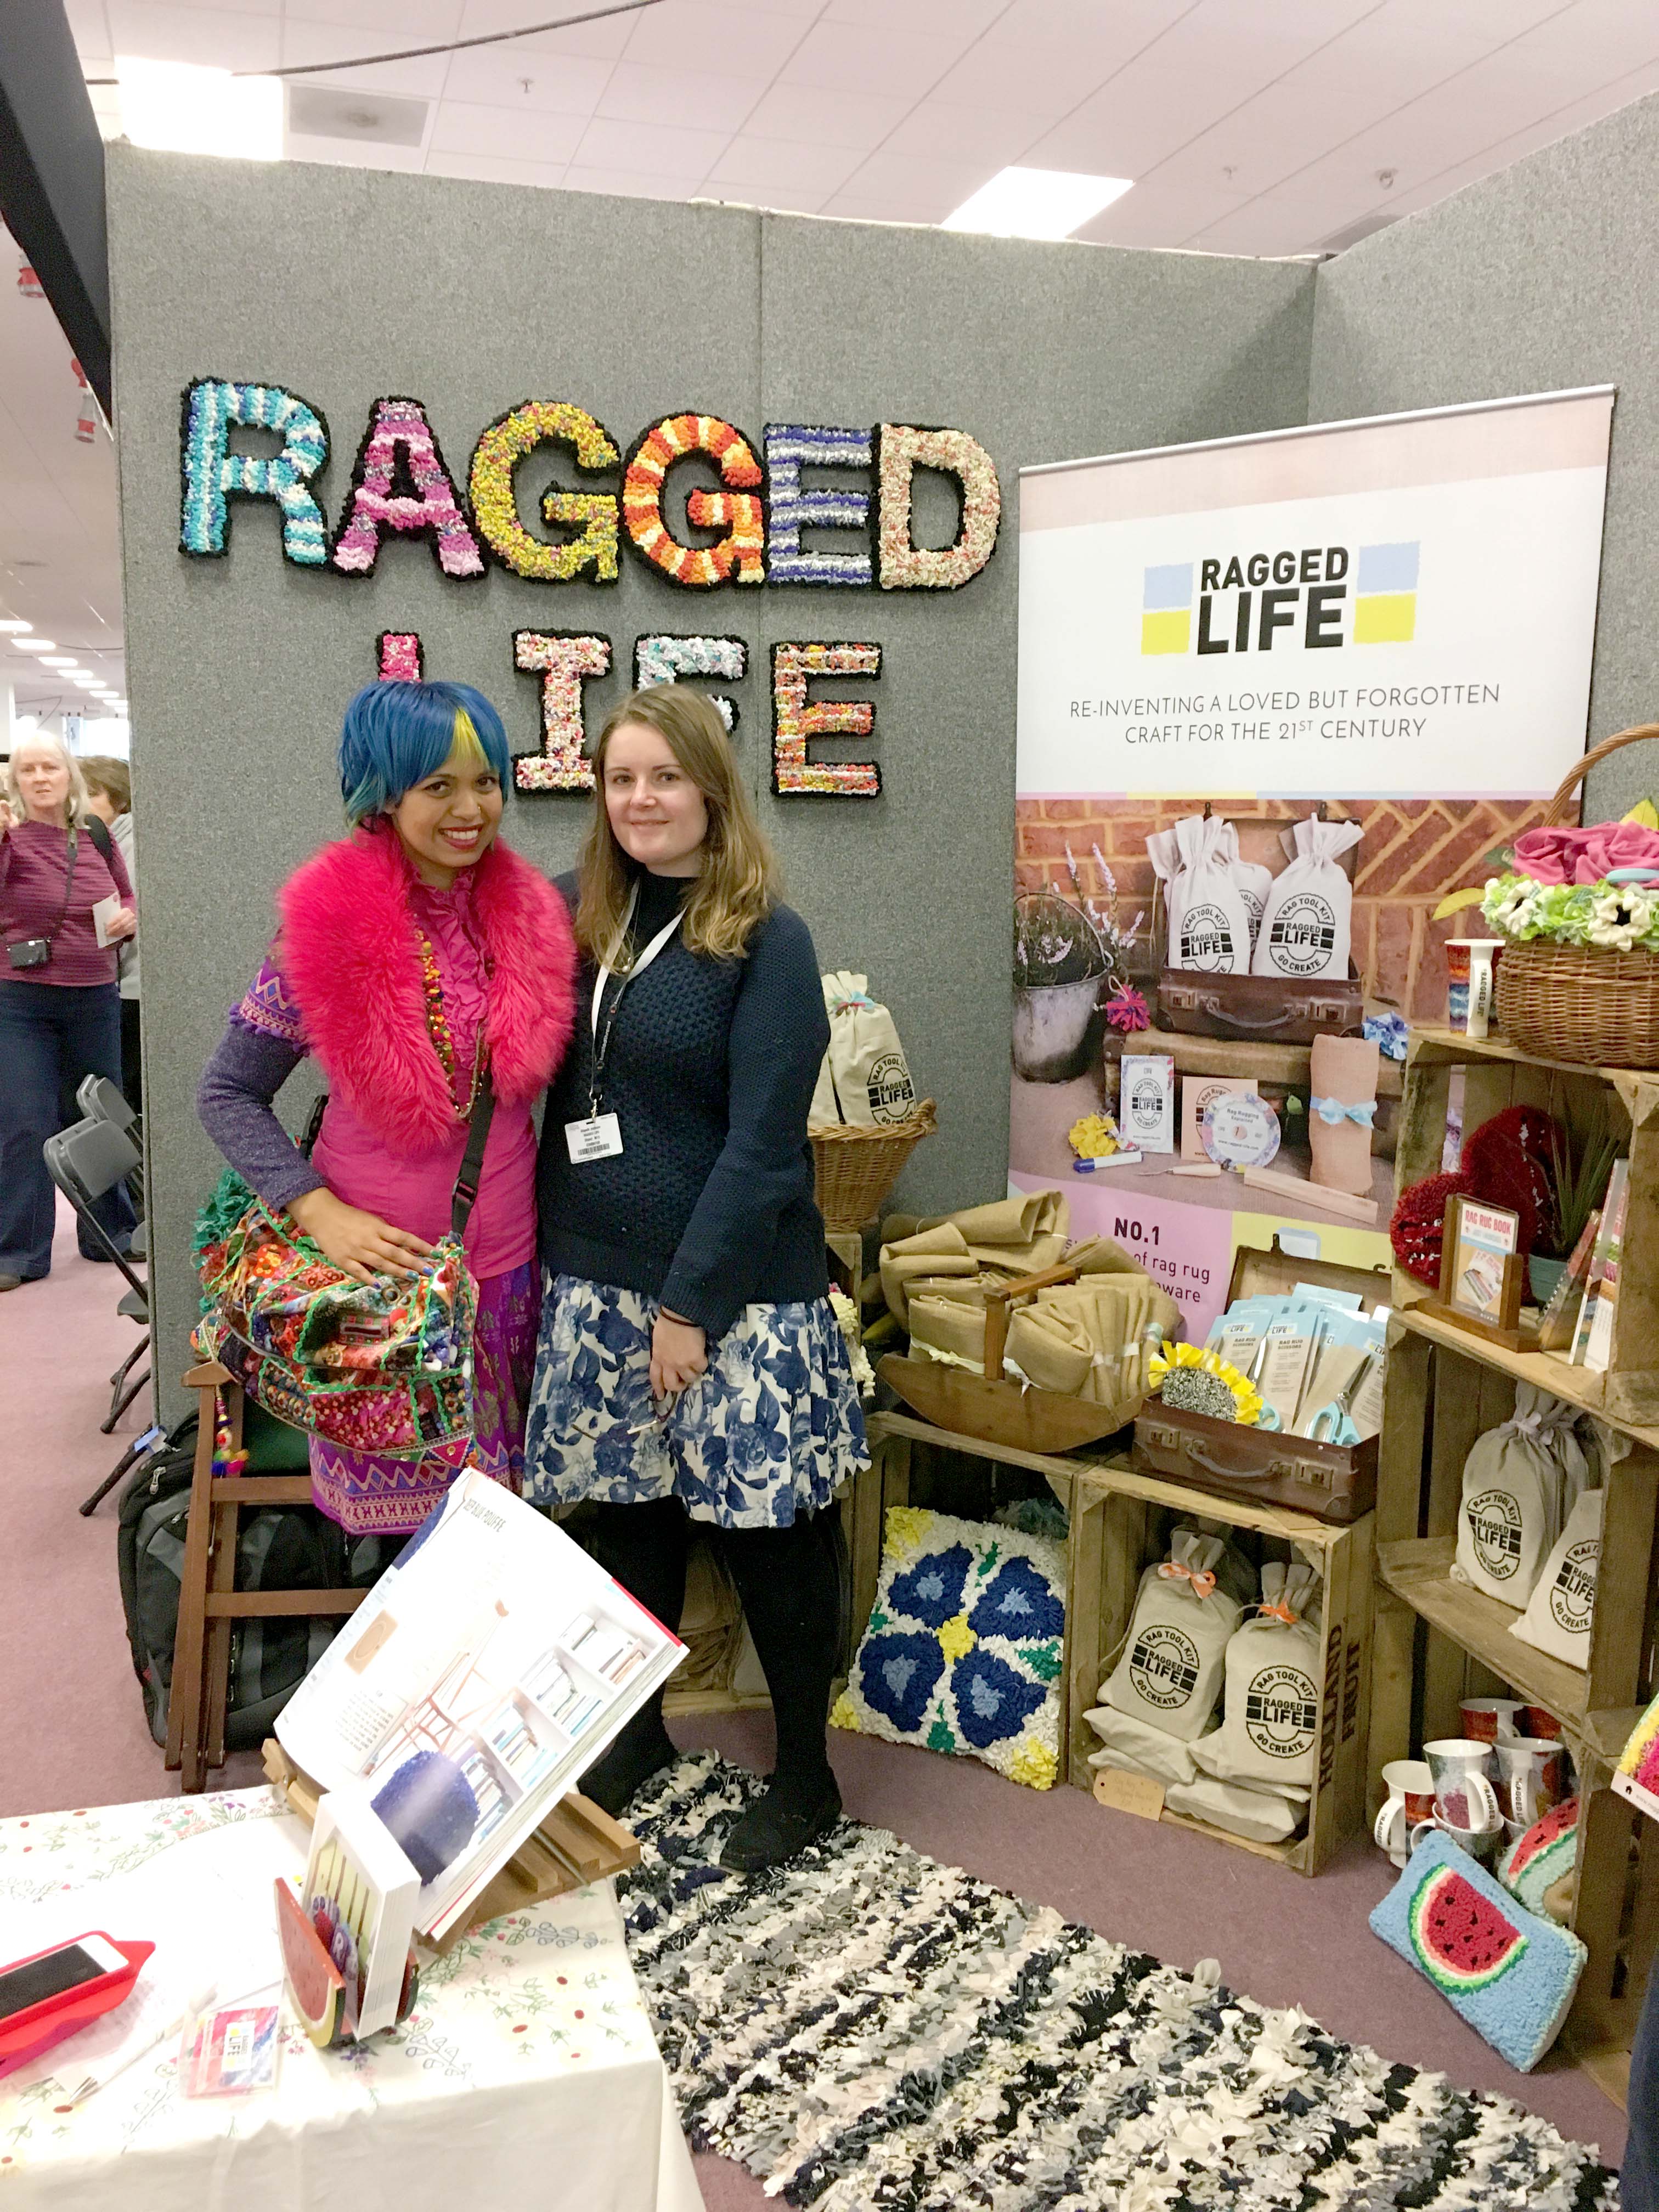 Elspeth Jackson from Ragged Life with Momtaz from Craft Cafe